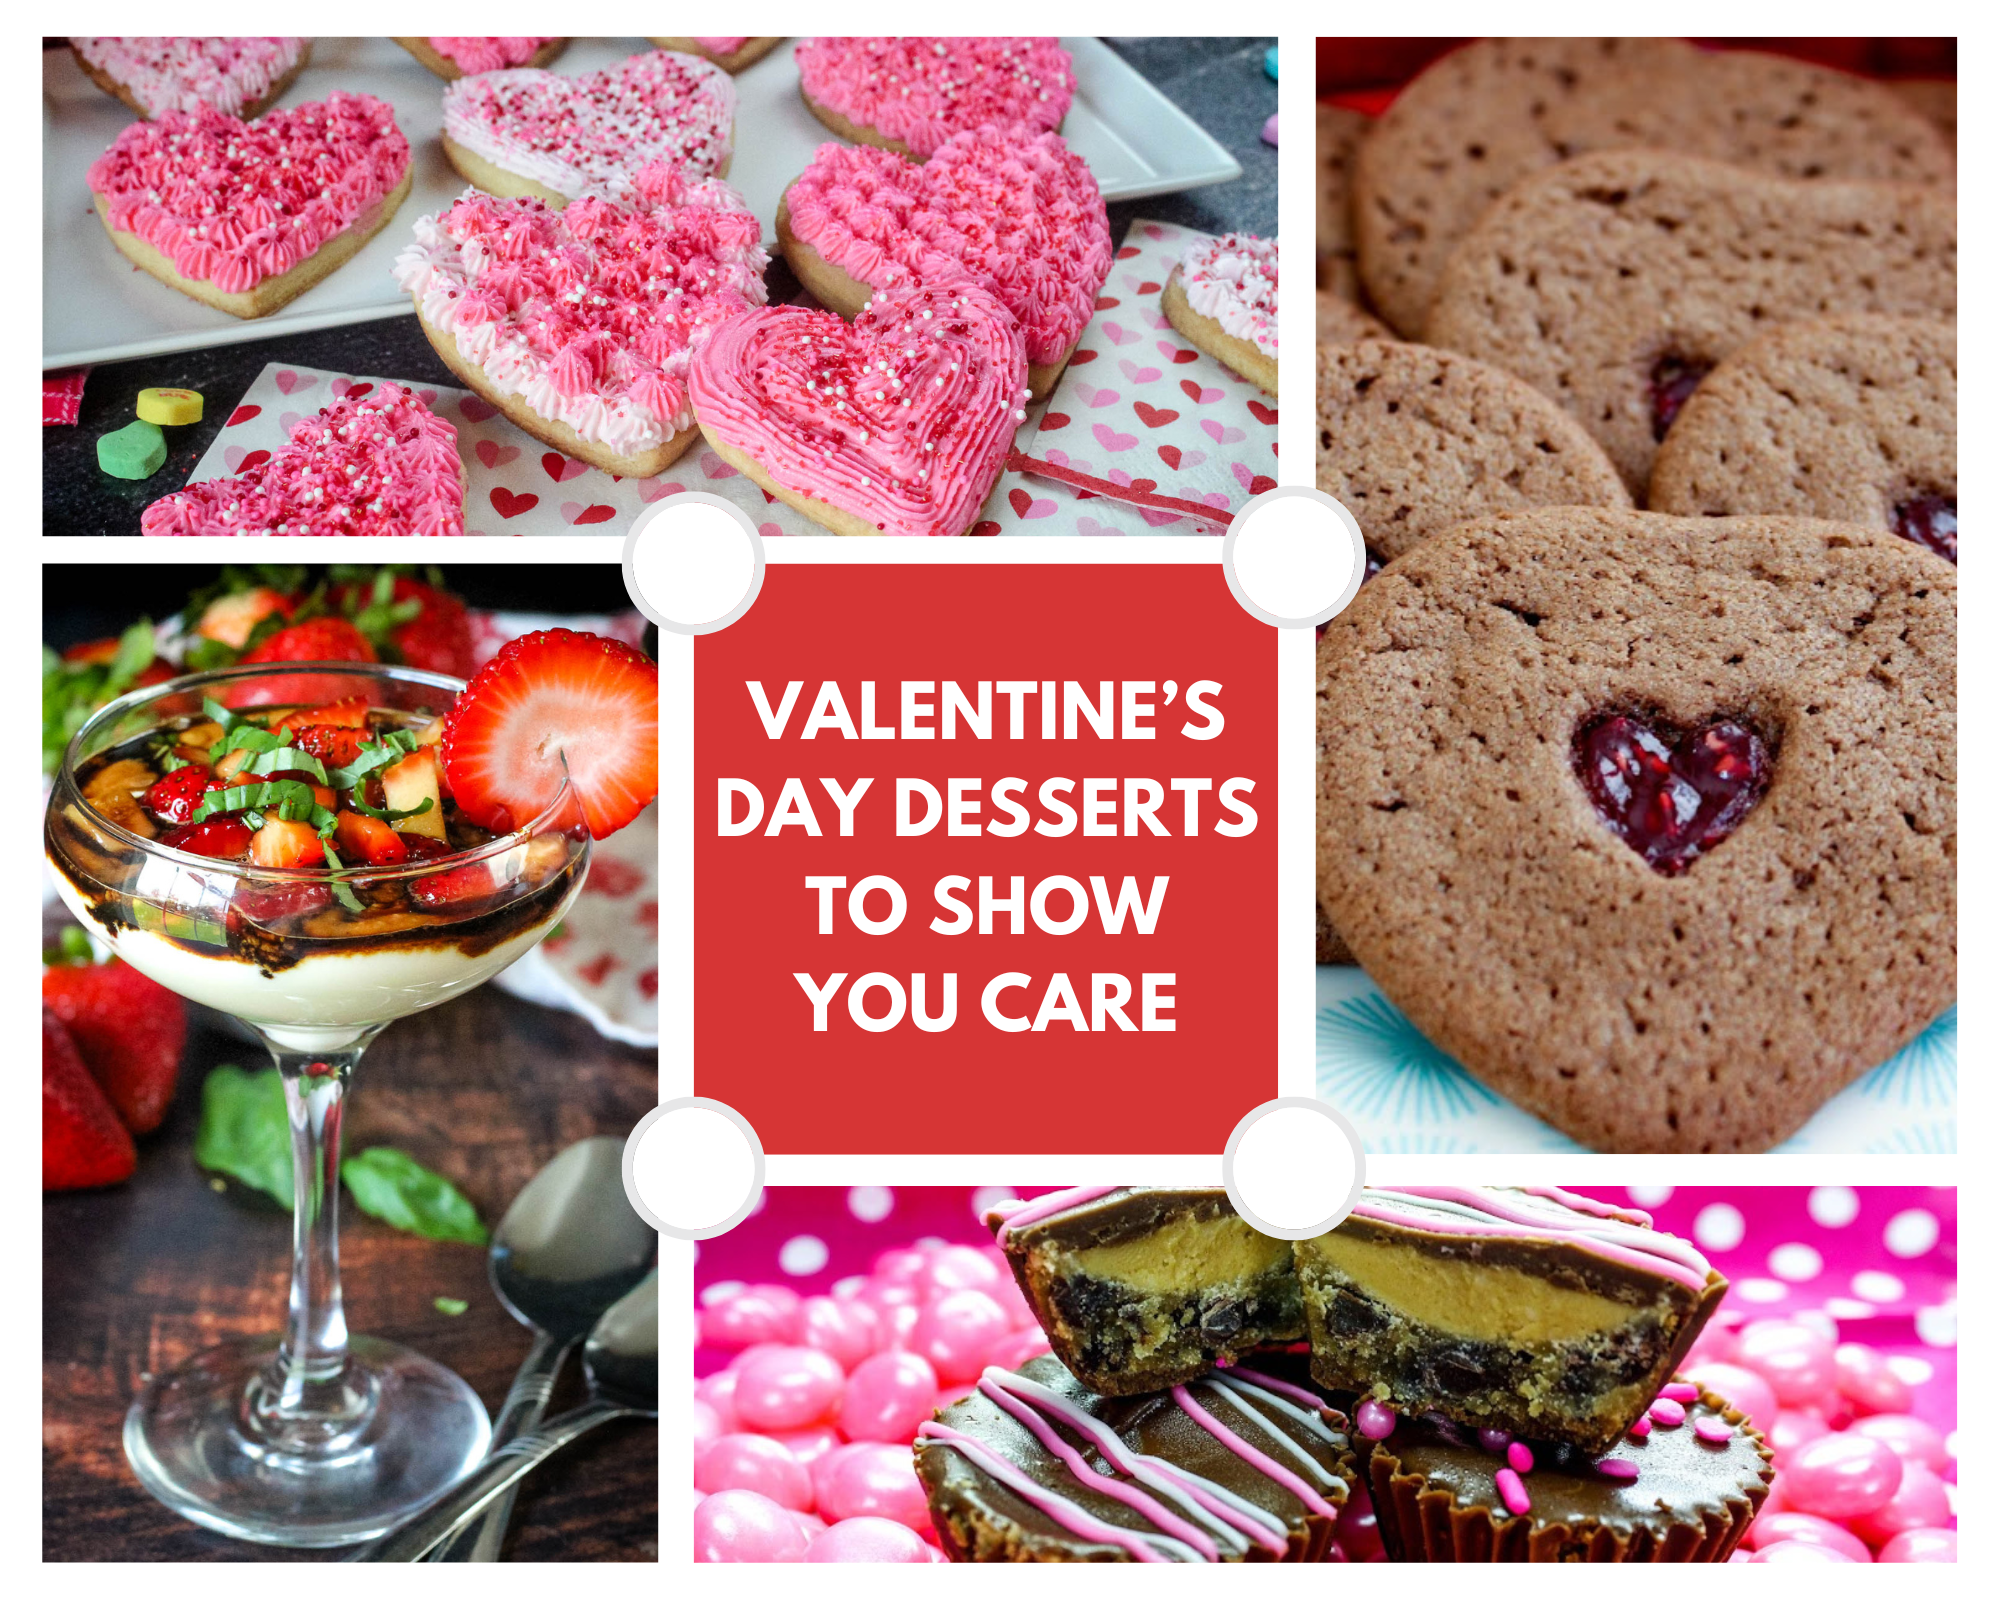 Valentine’s Day Desserts To Show You Care